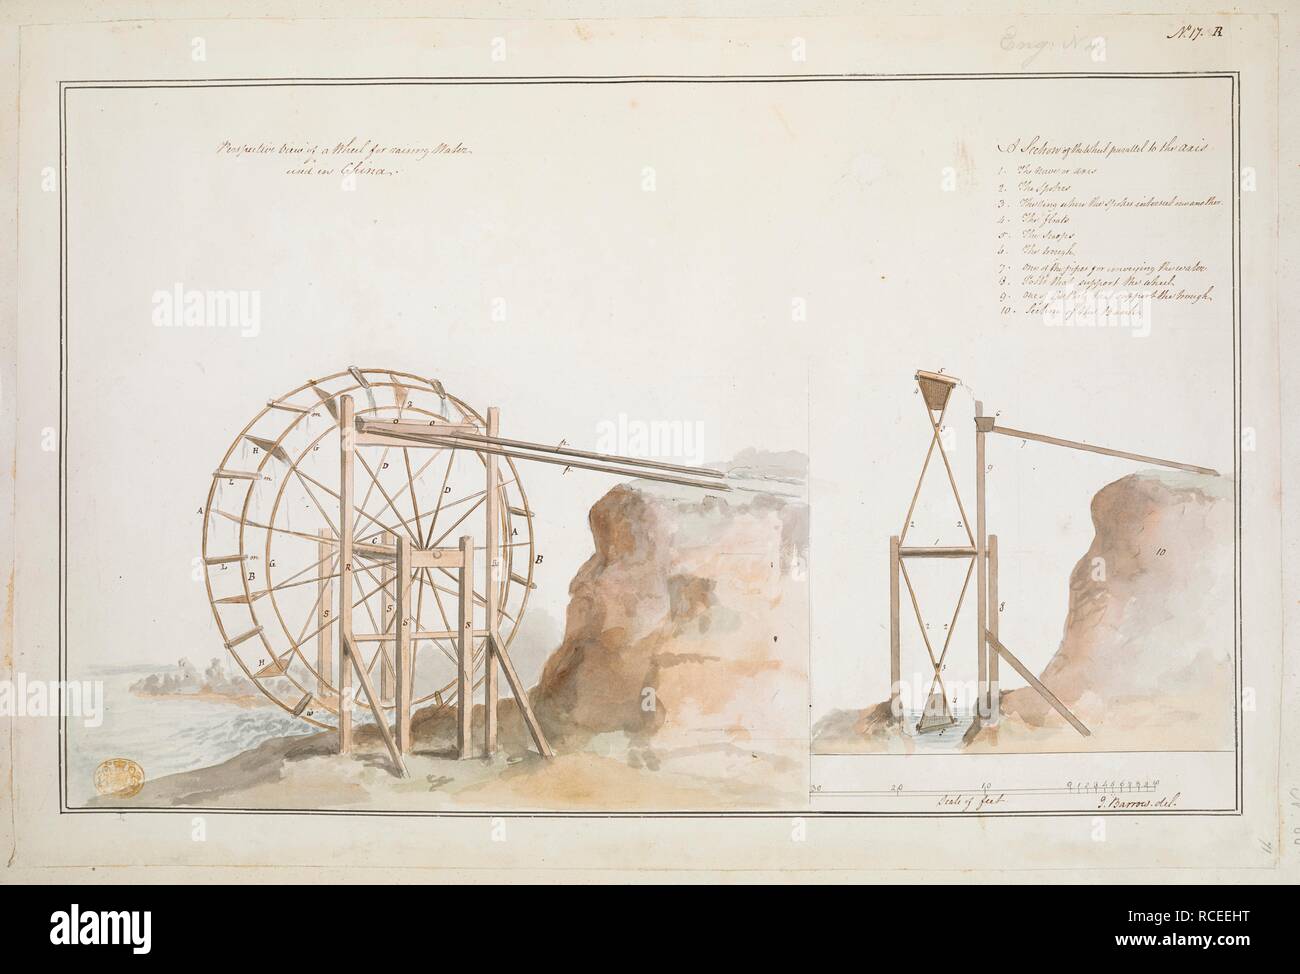 Perspective view of a Wheel for Raising water used in China. / J. Barrow del. Front and side view of a wooden water wheel, with key, scale and explanatory text at right.  . A collection of eighty views, maps, portraits and drawings illustrative of the Embassy sent to China under George, Earl of Macartney, in 1793; drawn chiefly by William Alexander, some by Sir John Barrow, Bart., some by Sir Henry Woodbine Parish, and one by William Gomm. Many of them are engraved in Sir George Staunton's Narrative of the Embassy, published in 1797. 1793. 1 drawing : ink and watercolour ; sheet 36.2 x 54 cm.  Stock Photo